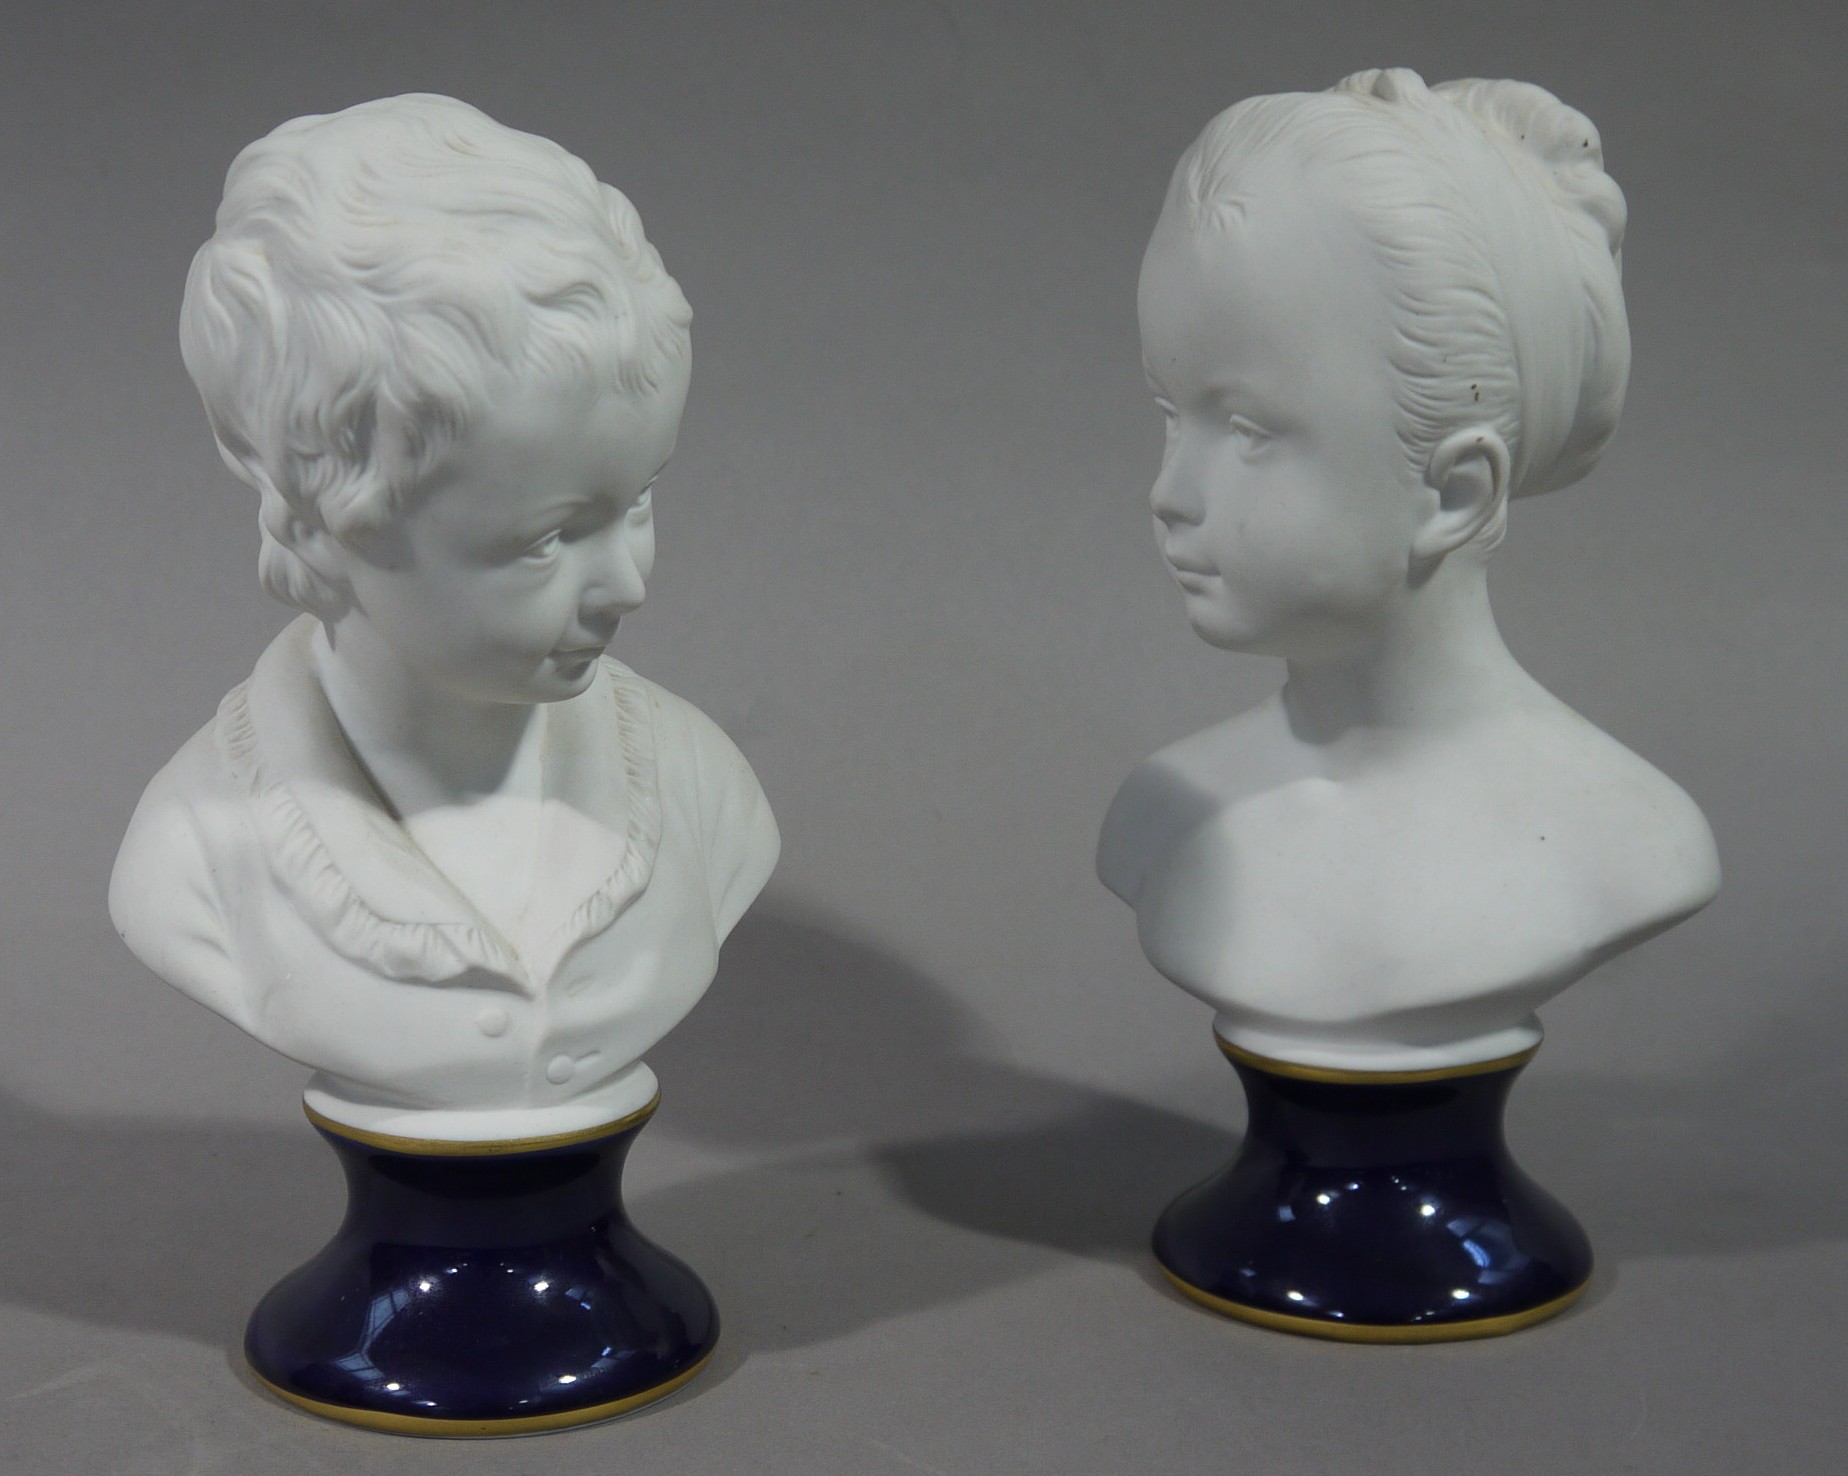 A pair of German porcelain bisque busts by Unterweissbach,